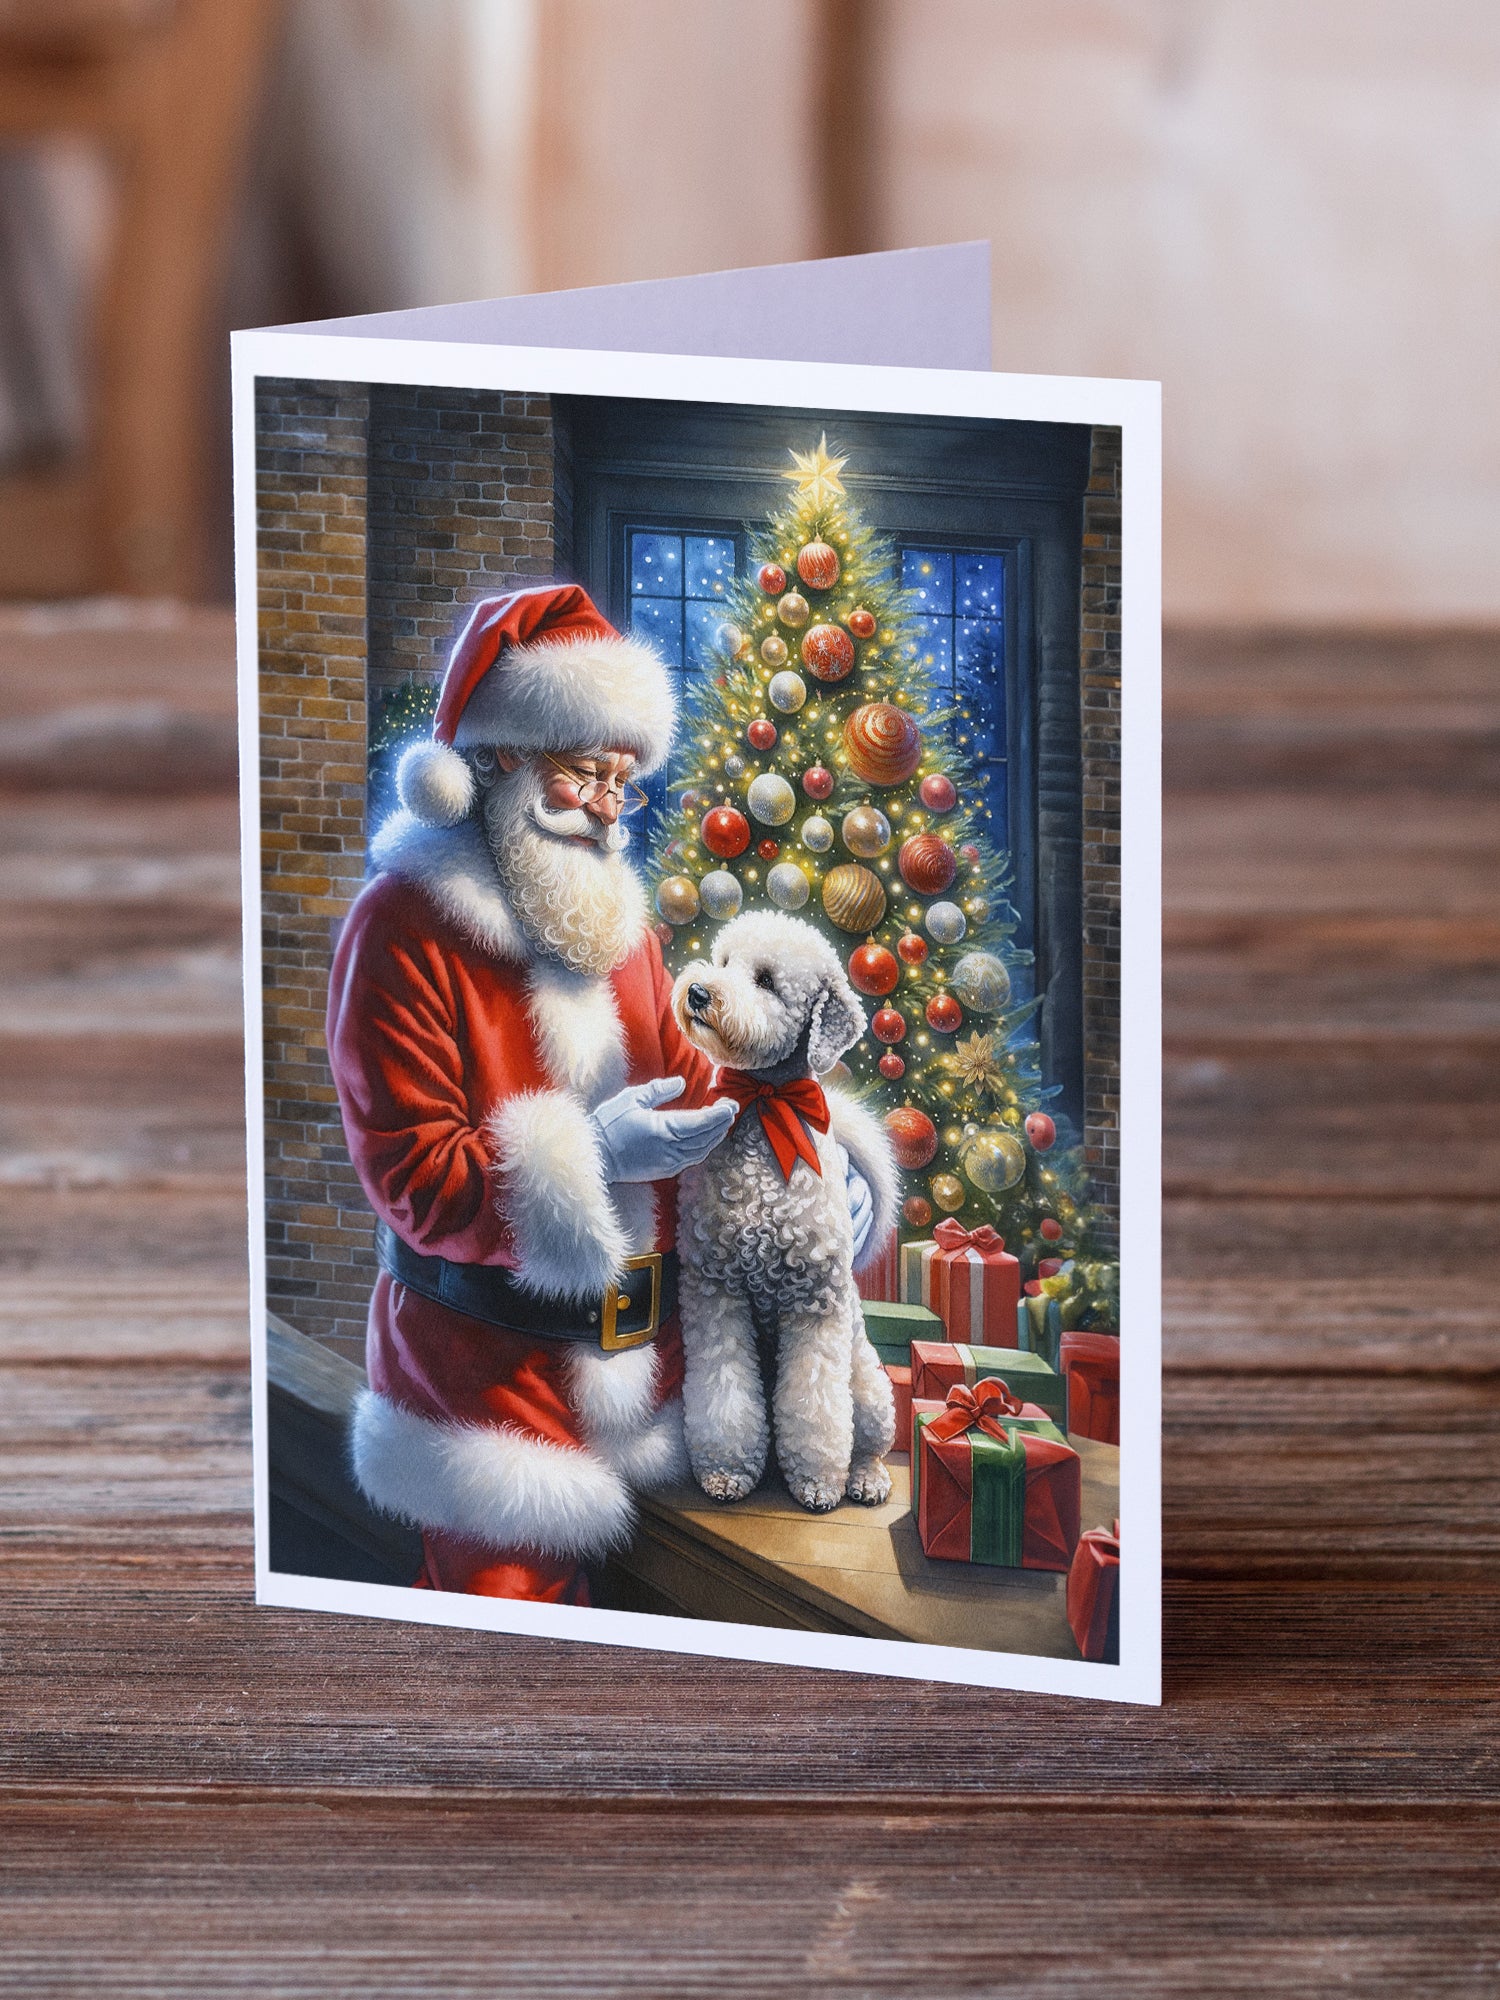 Bedlington Terrier and Santa Claus Greeting Cards Pack of 8